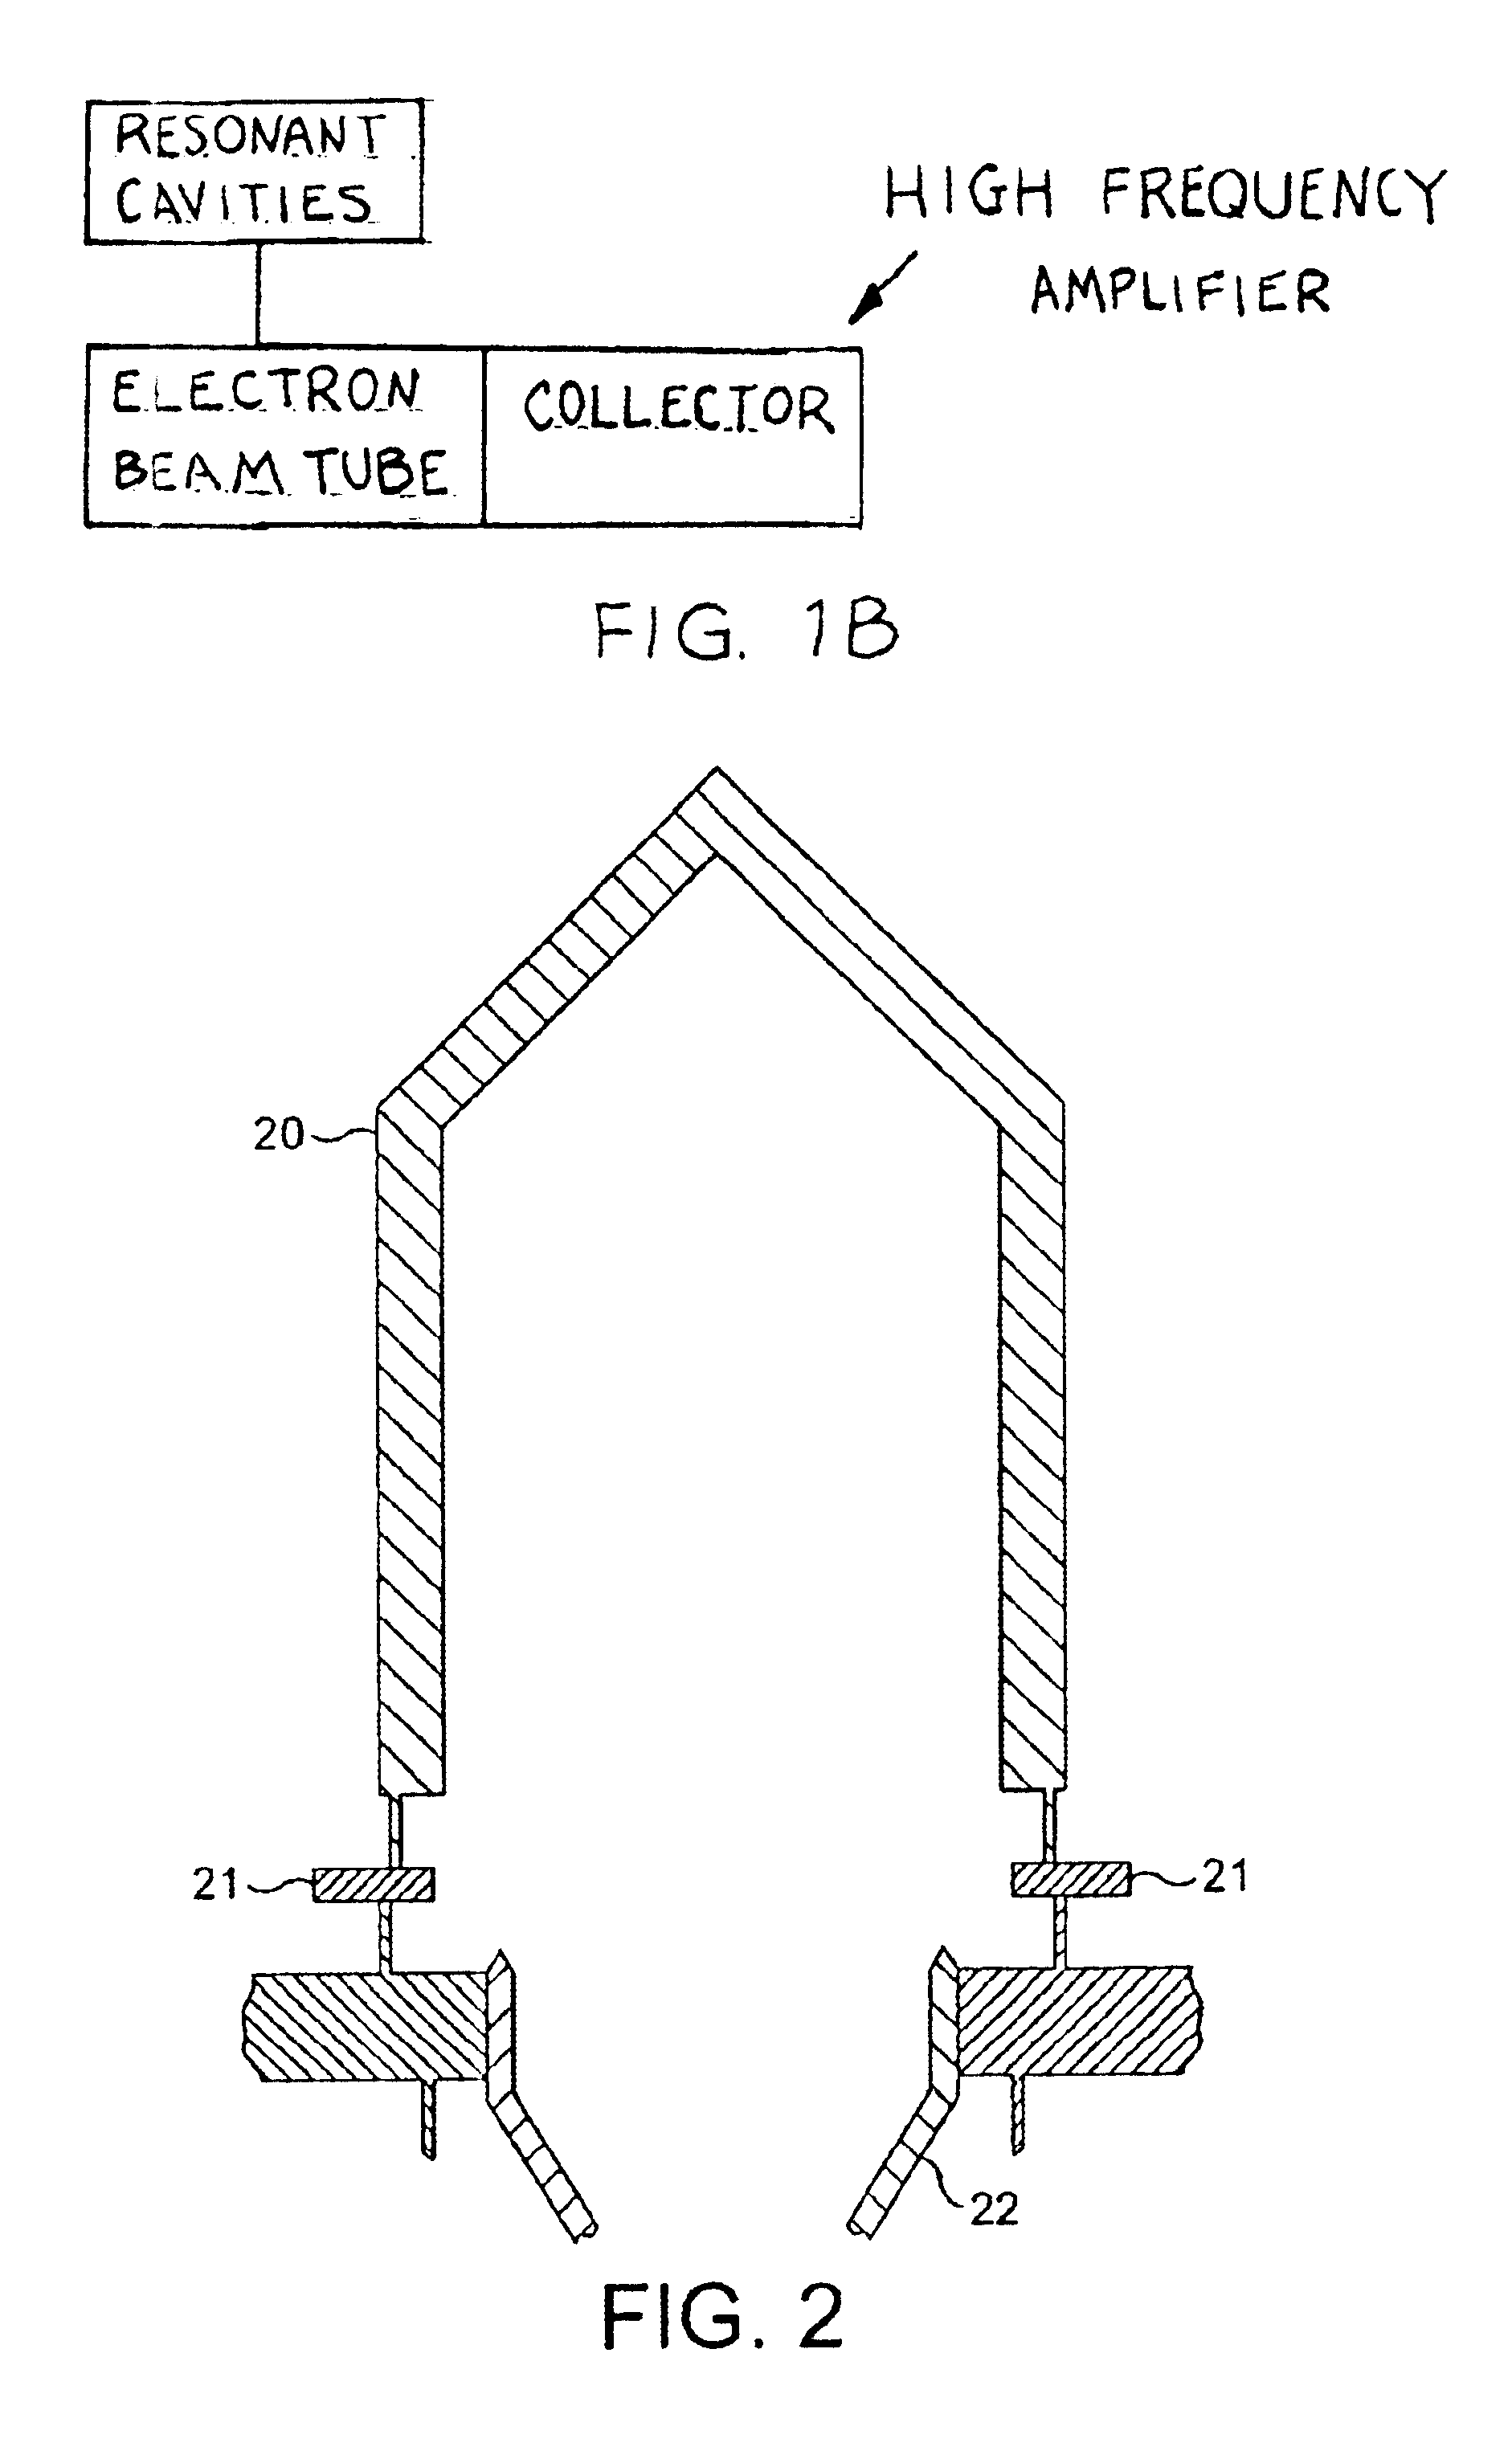 Multi-stage collector having electrode stages isolated by a distributed bypass capacitor